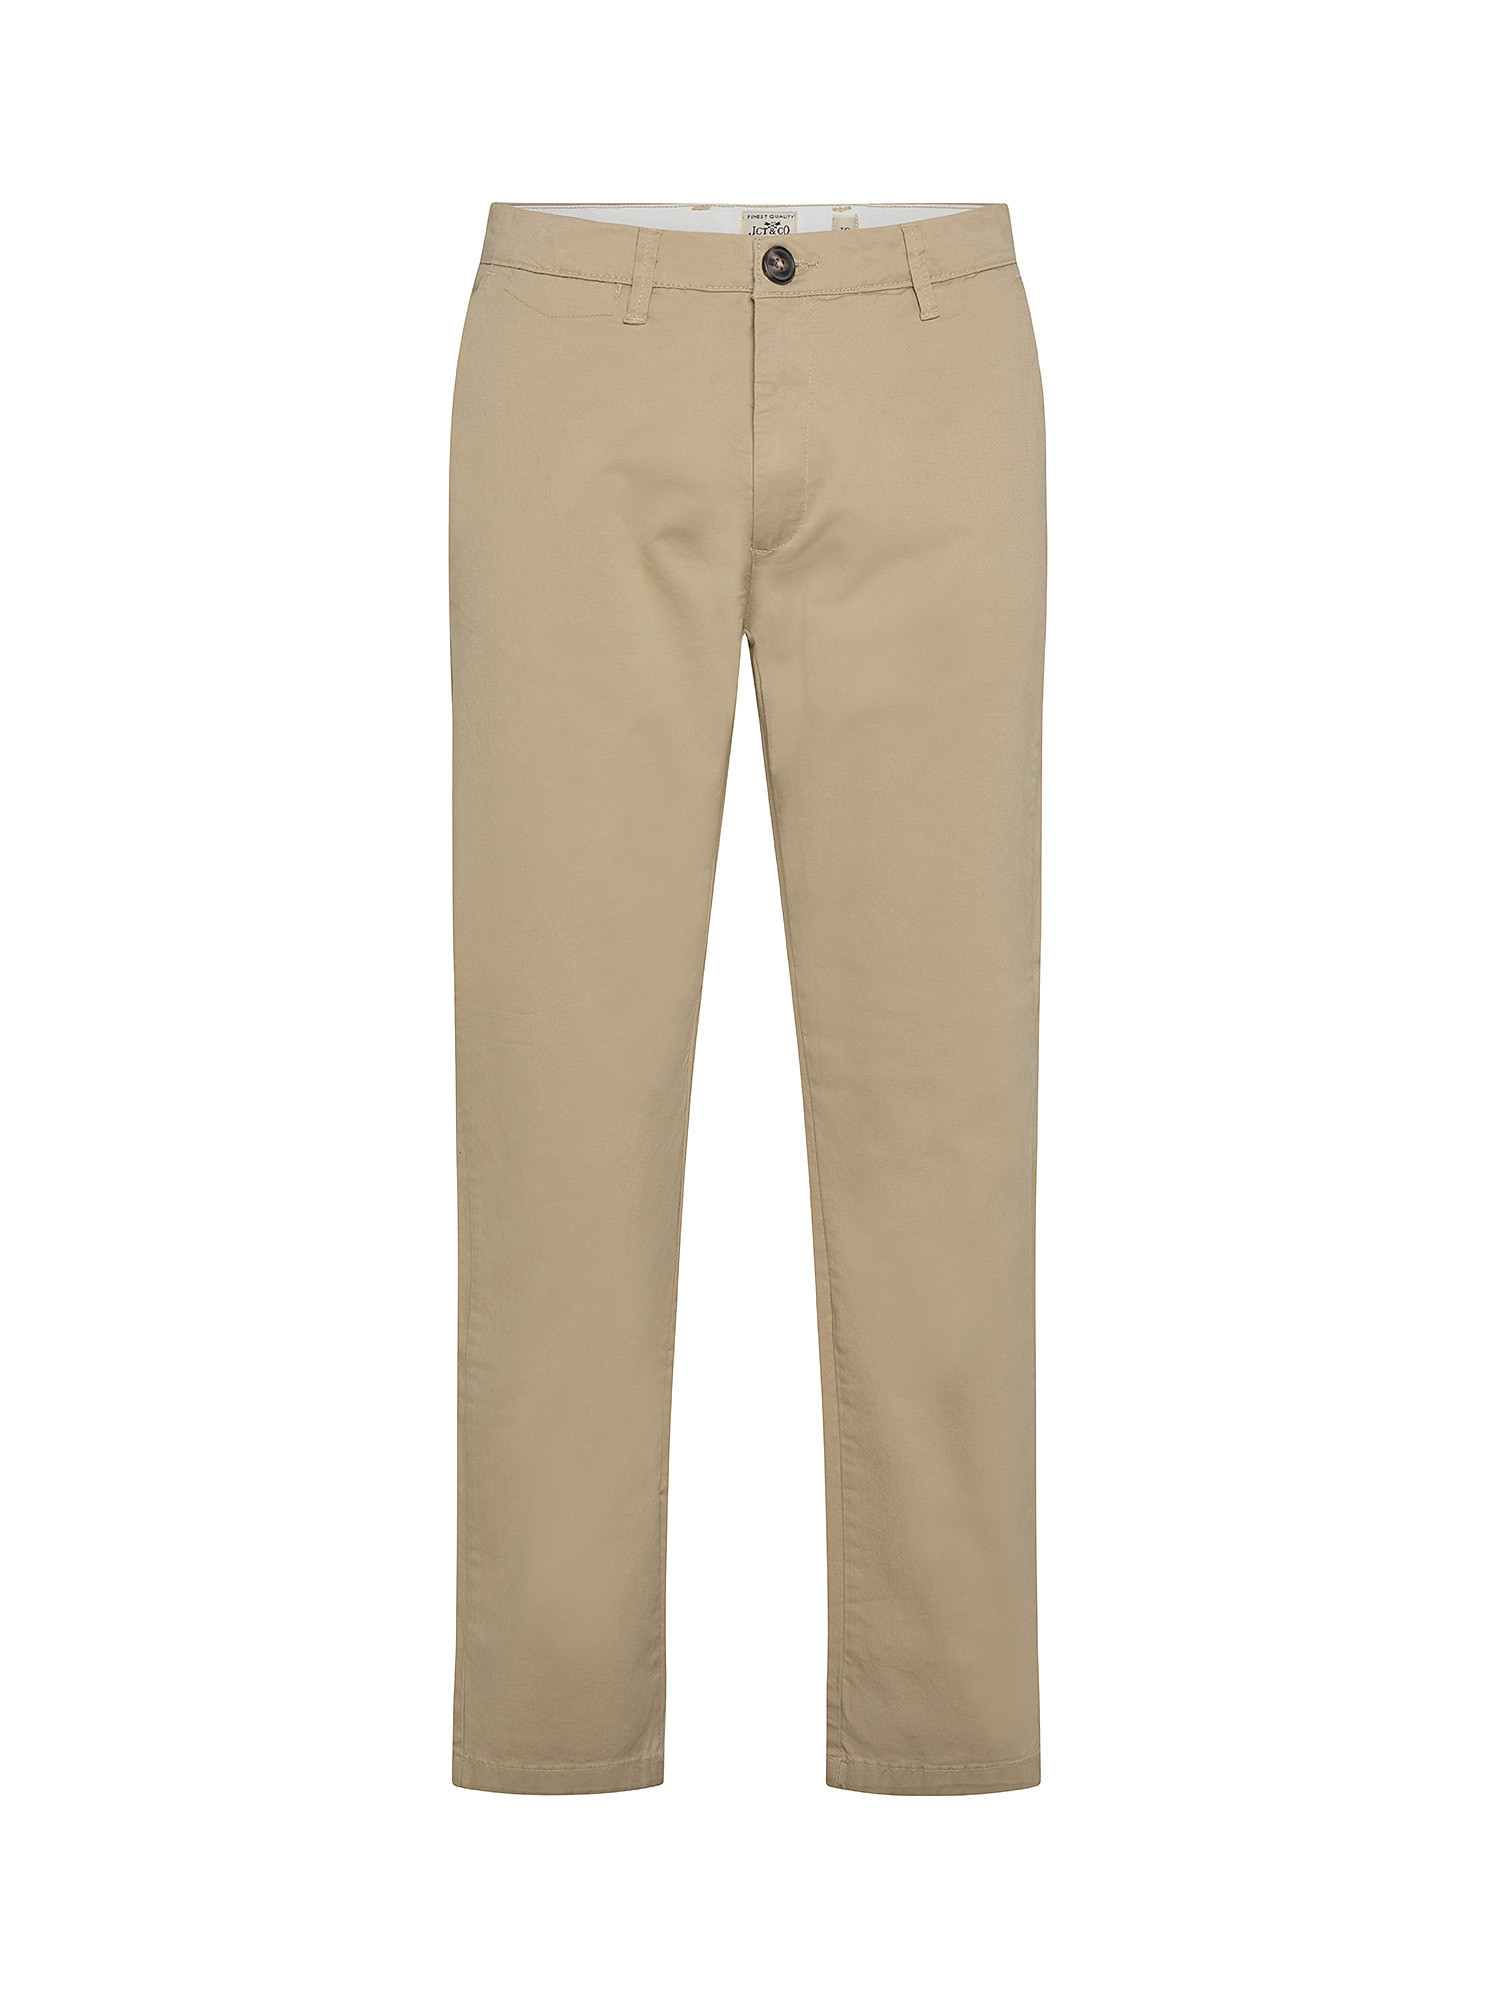 Pantalone chinos cotone stretch, Beige, large image number 0